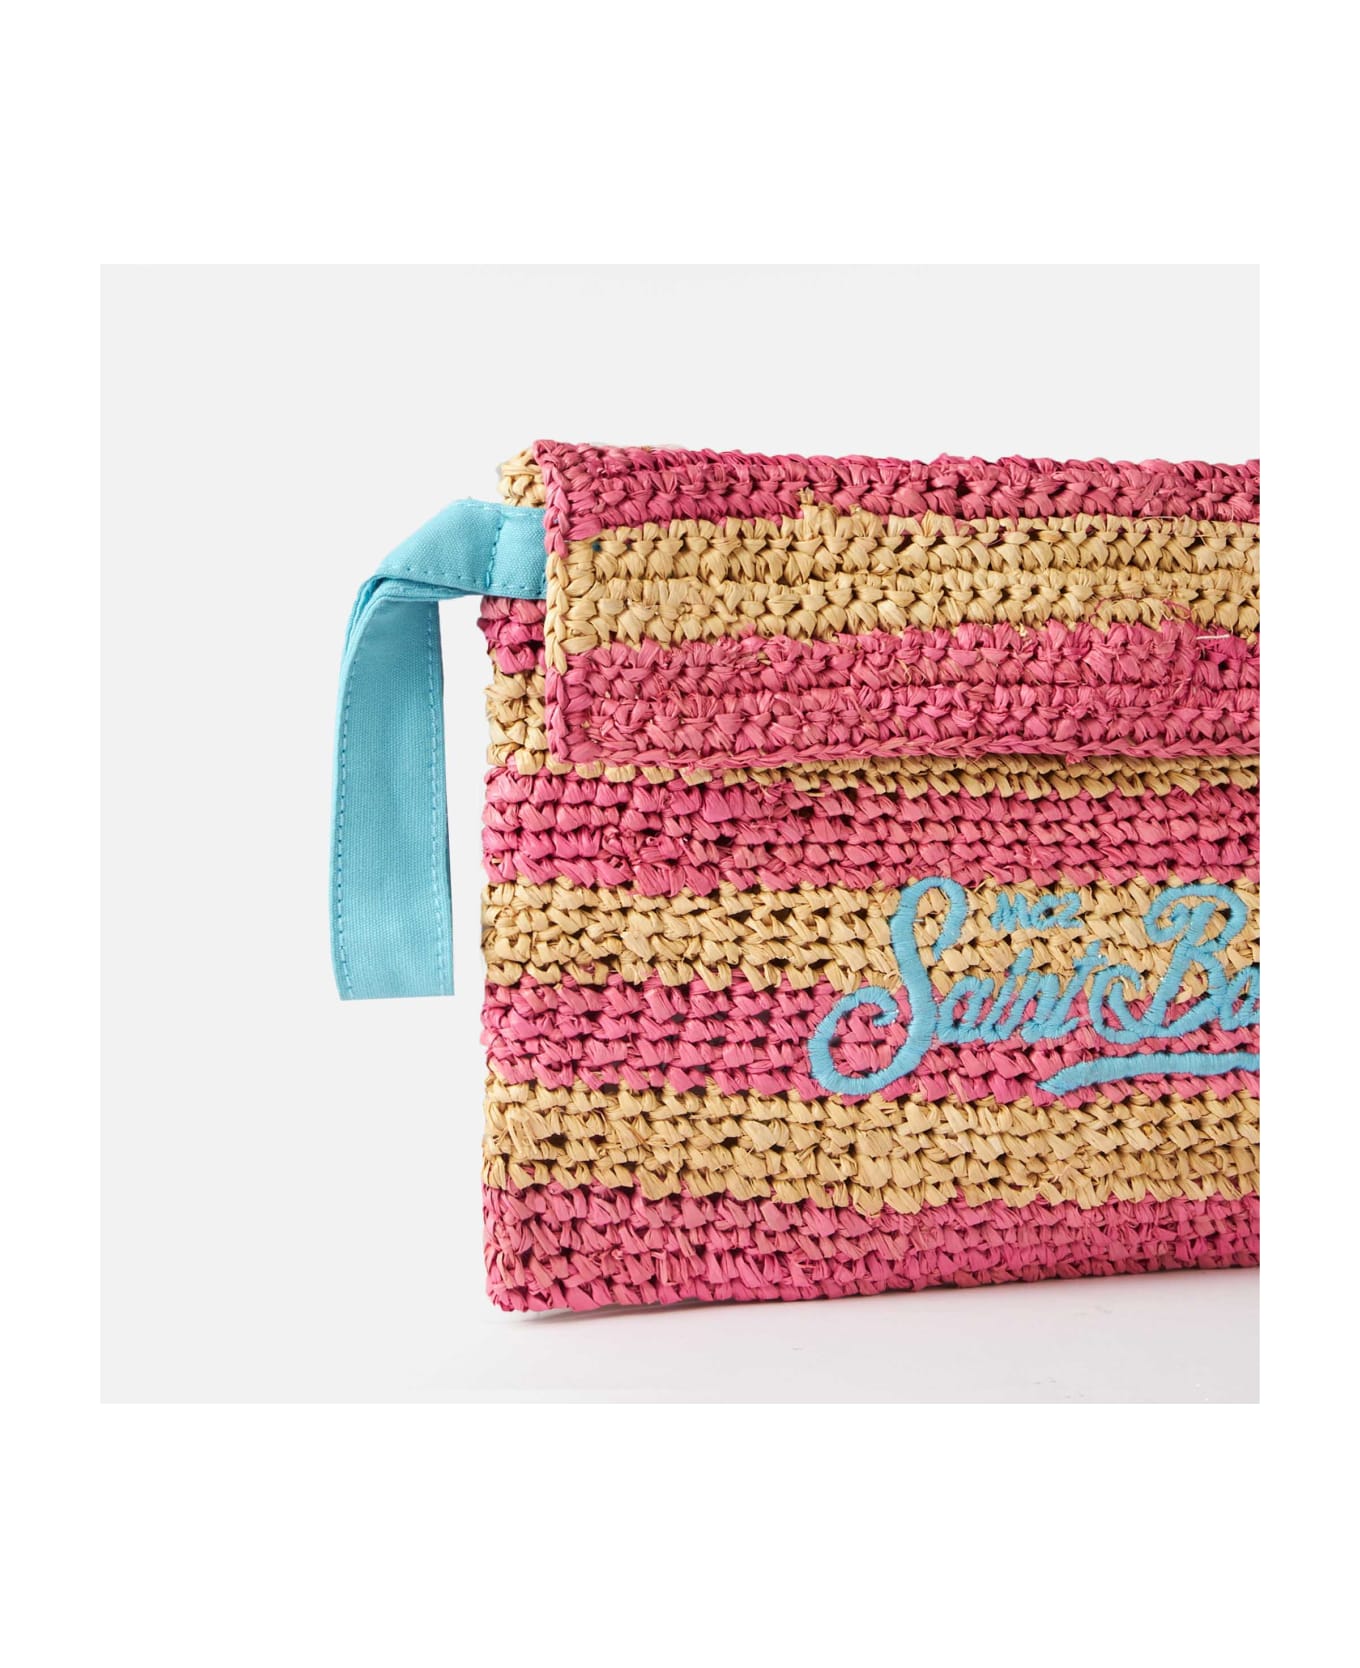 MC2 Saint Barth Raffia Striped Pouch Bag With Saint Barth Embroidery - PINK クラッチバッグ